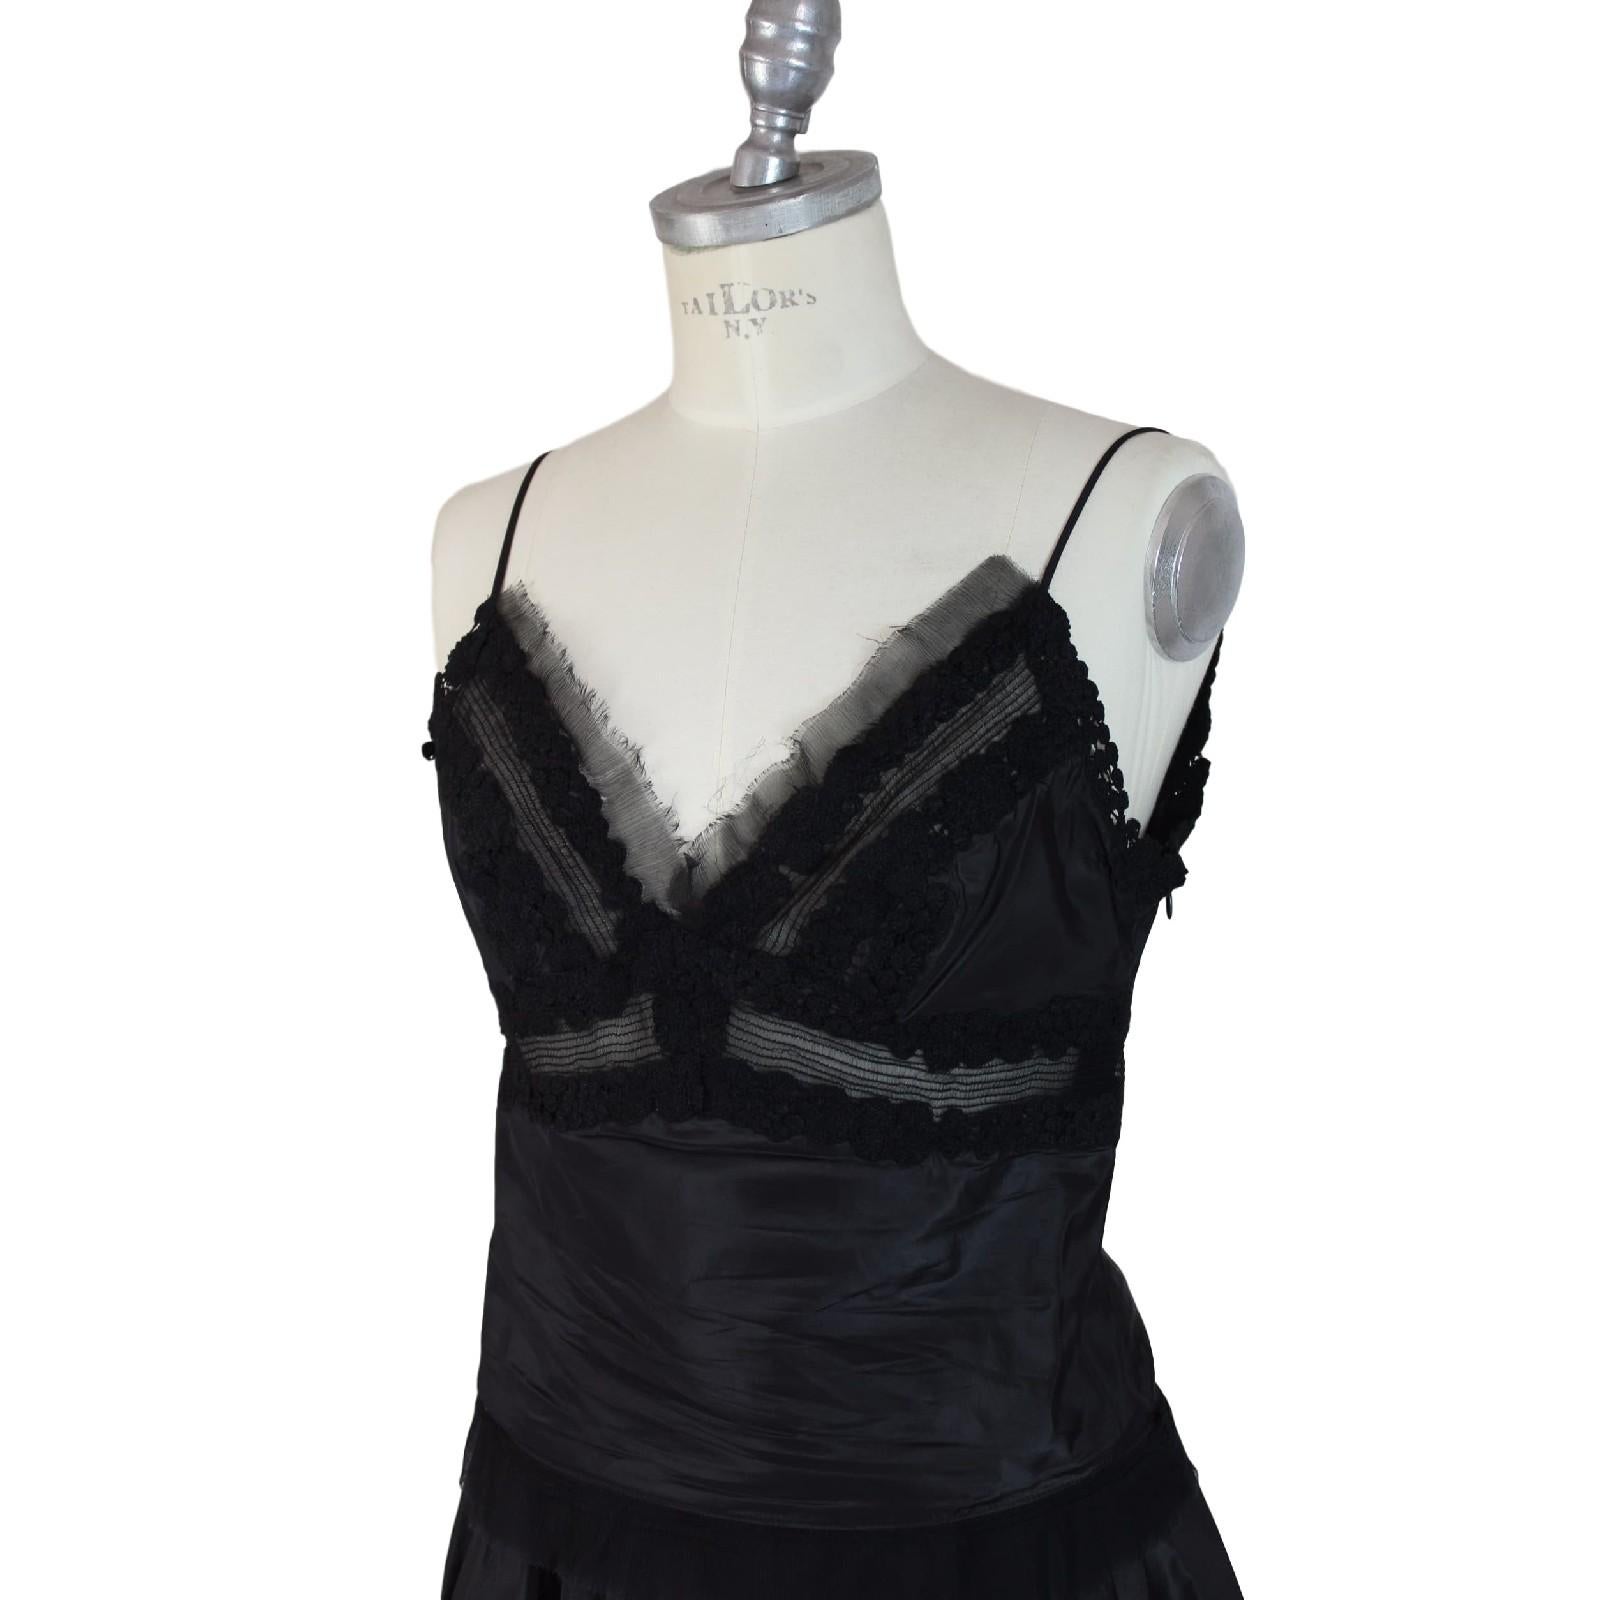 Ermanno Scervino black silk evening dress, top with suspenders, voluminous skirt, exceptional work in silk with raw cut, the skirt with two large side pockets.

SIZE 44 IT 12 US 14 UK

Shoulders: 44 cm
Bust / chest: 44
Length: 37 cm
Waist: 36